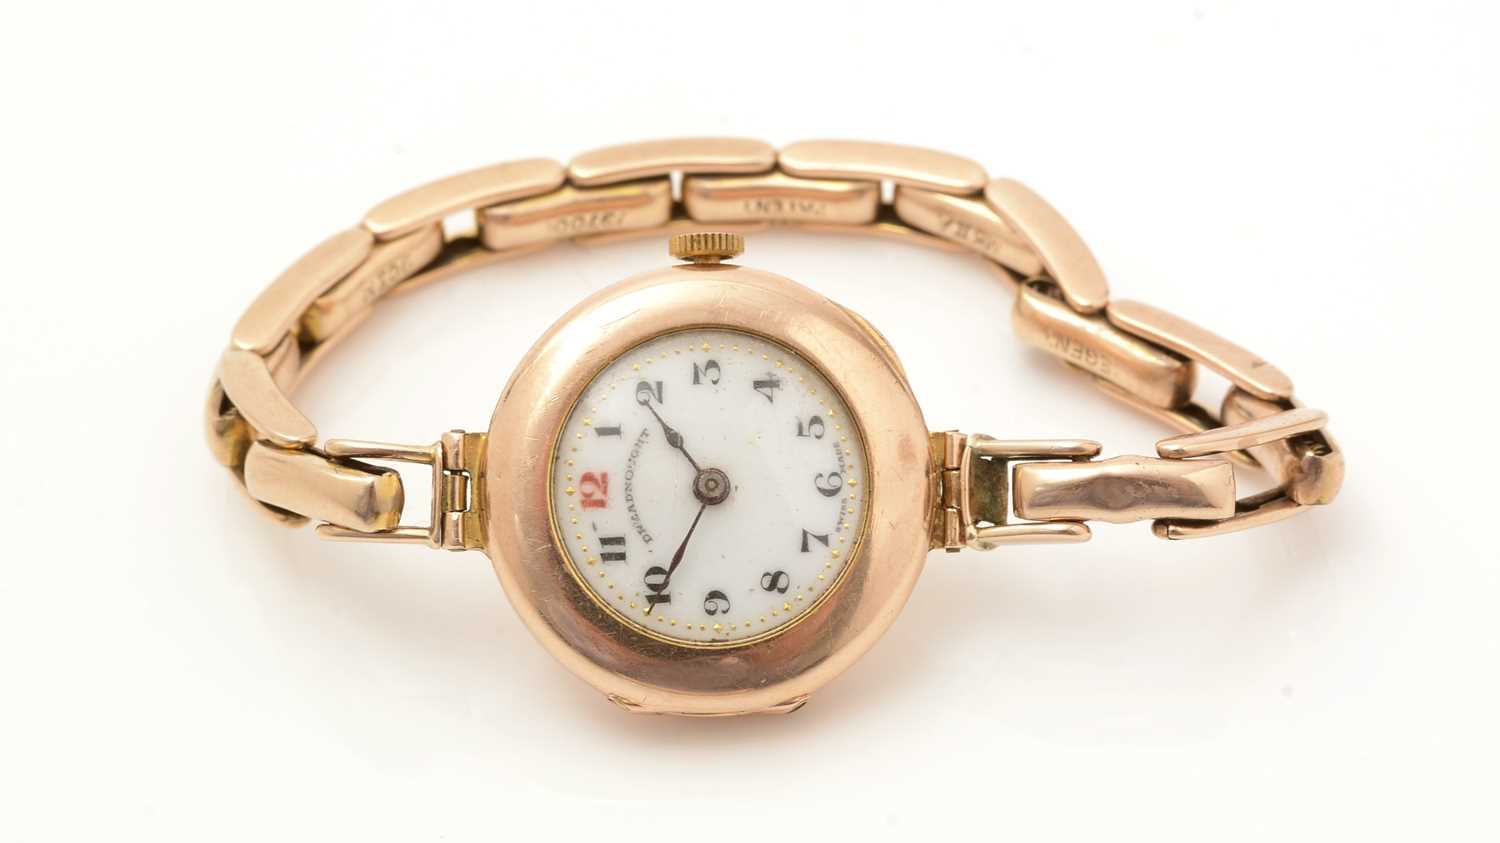 Lot 101 - A 9ct yellow gold cased wristwatch, the white enamel arabic dial marked Dreadnought